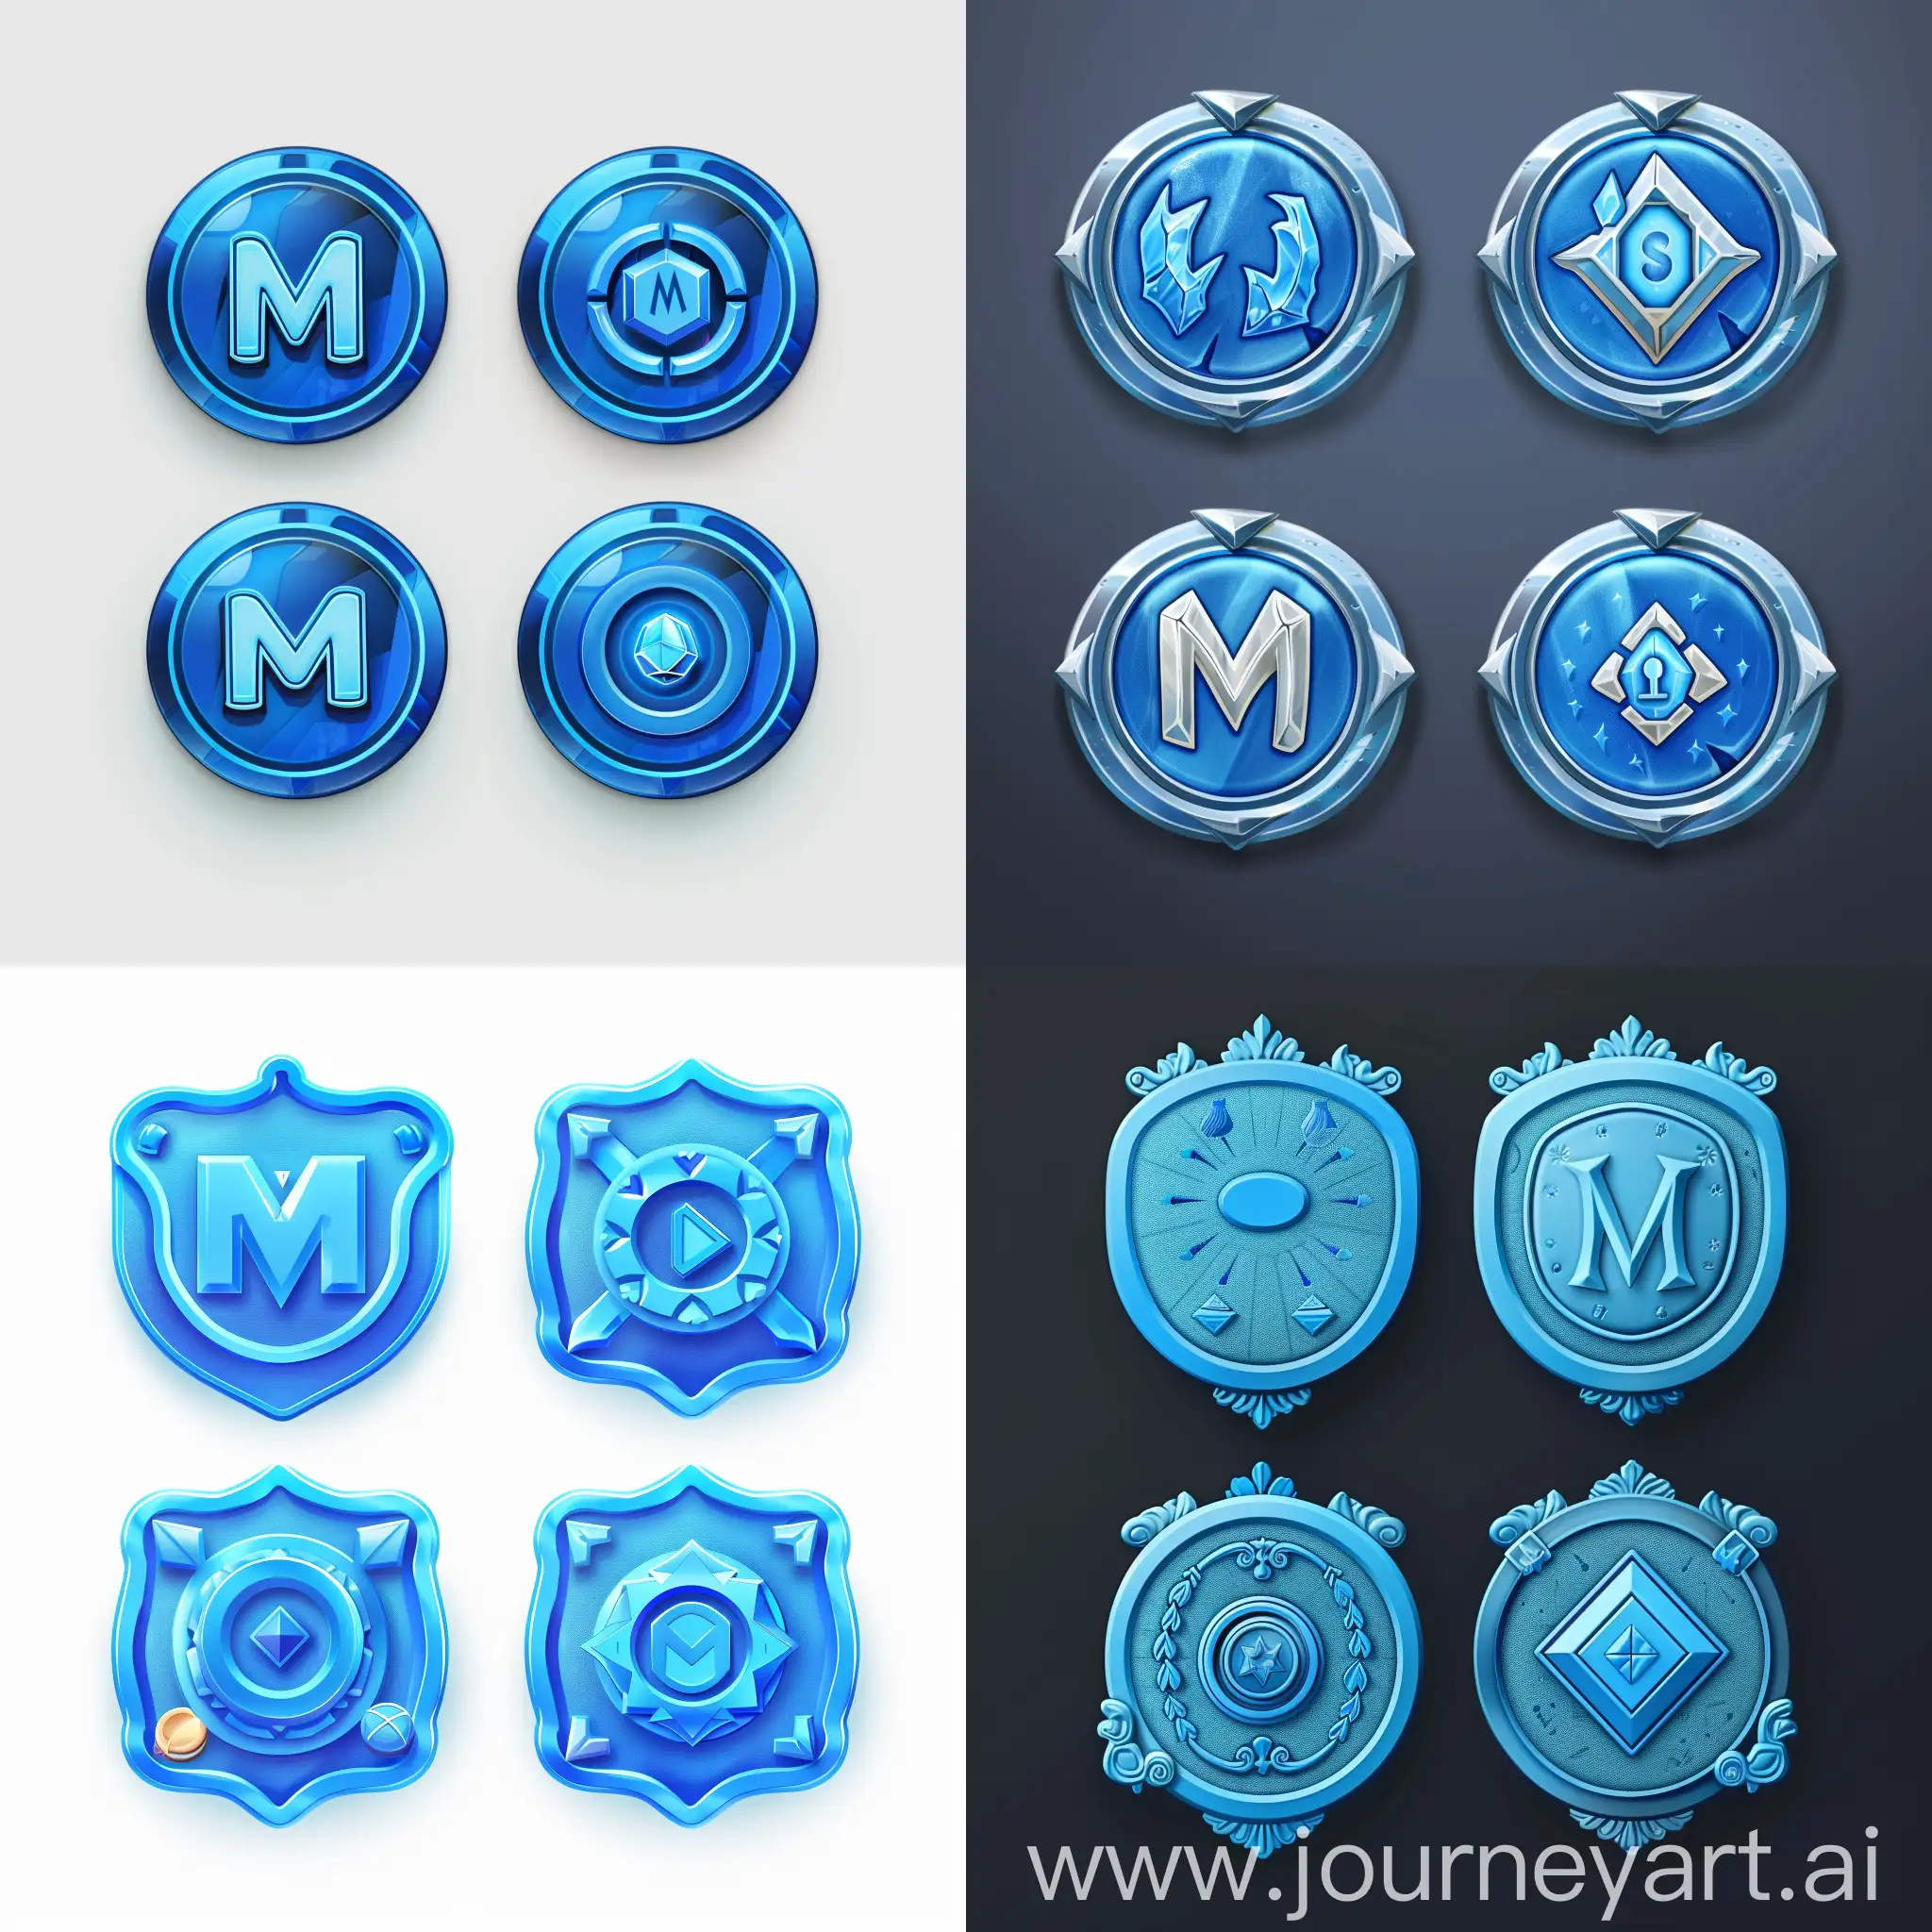 Set-of-Blue-Badges-with-Central-Letter-M-for-Various-Functions